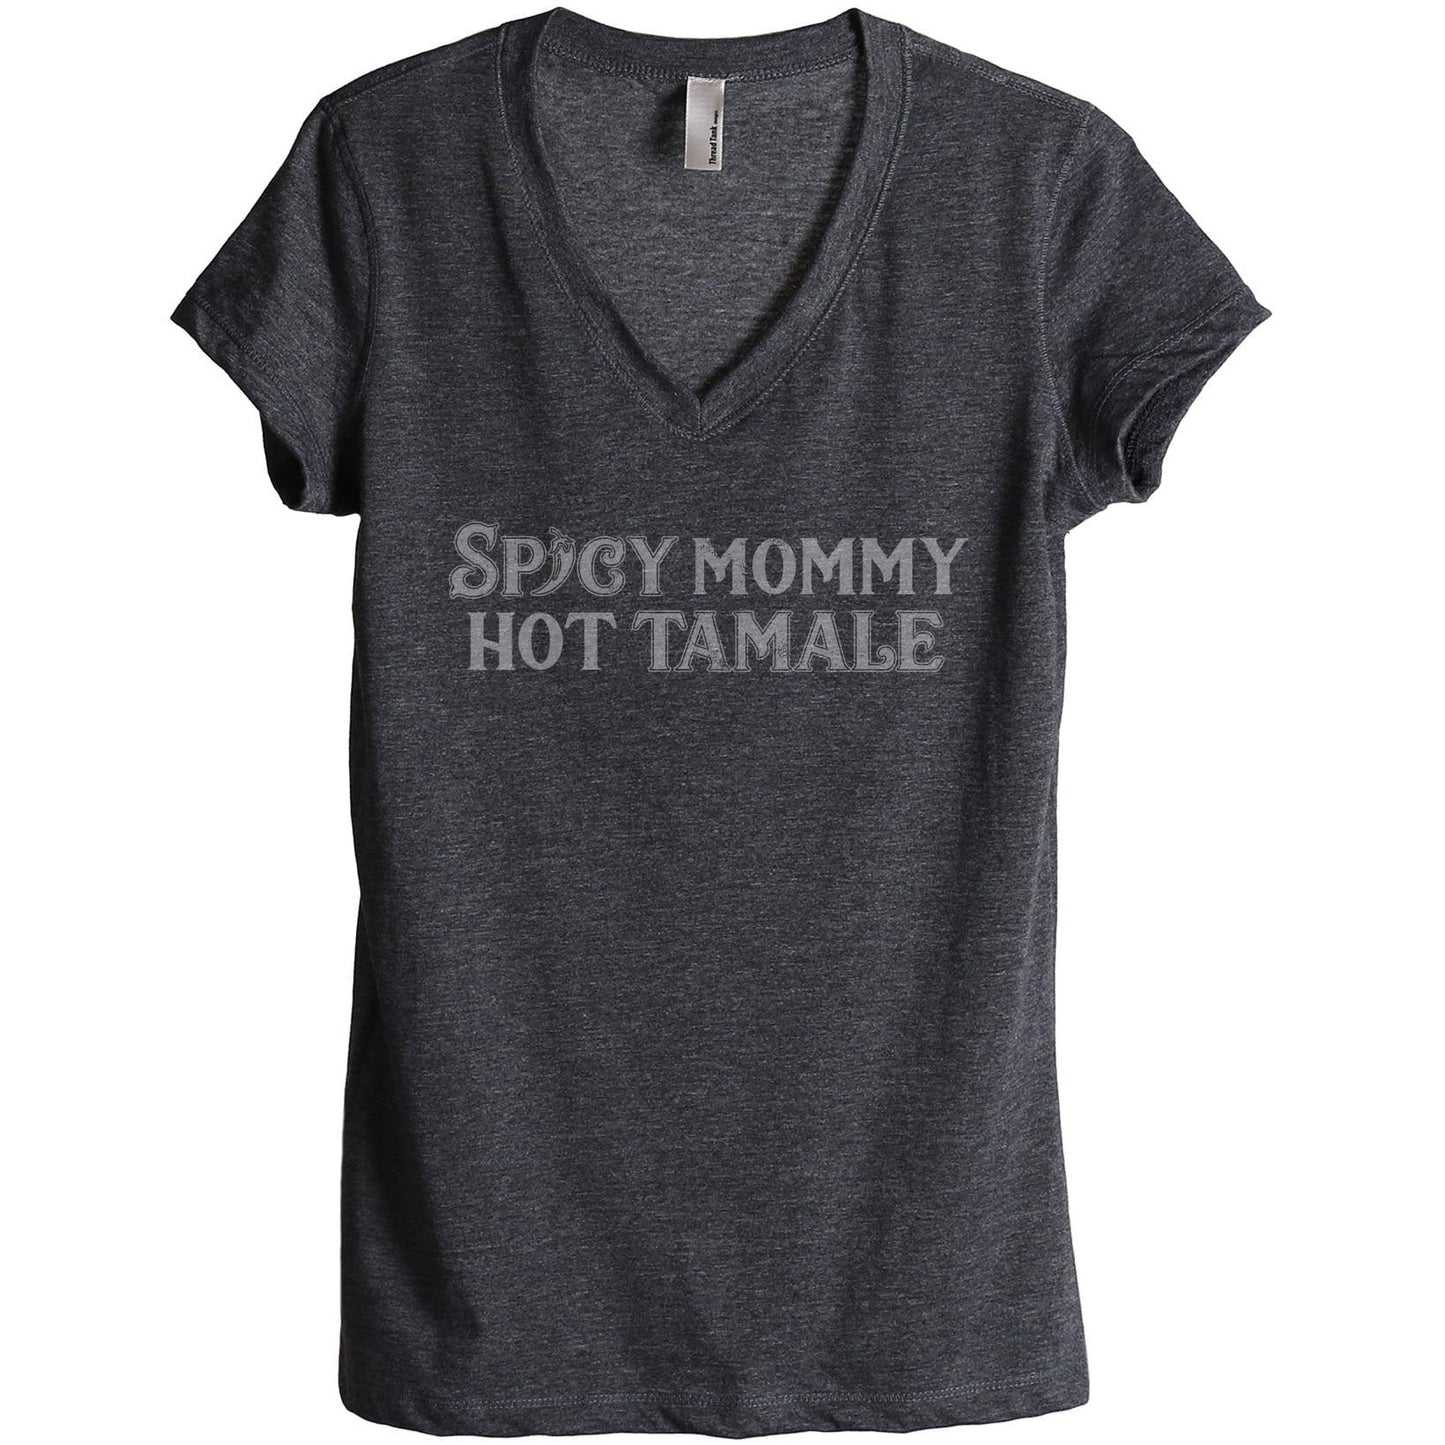 Spicy Mommy Hot Tamale - Stories You Can Wear